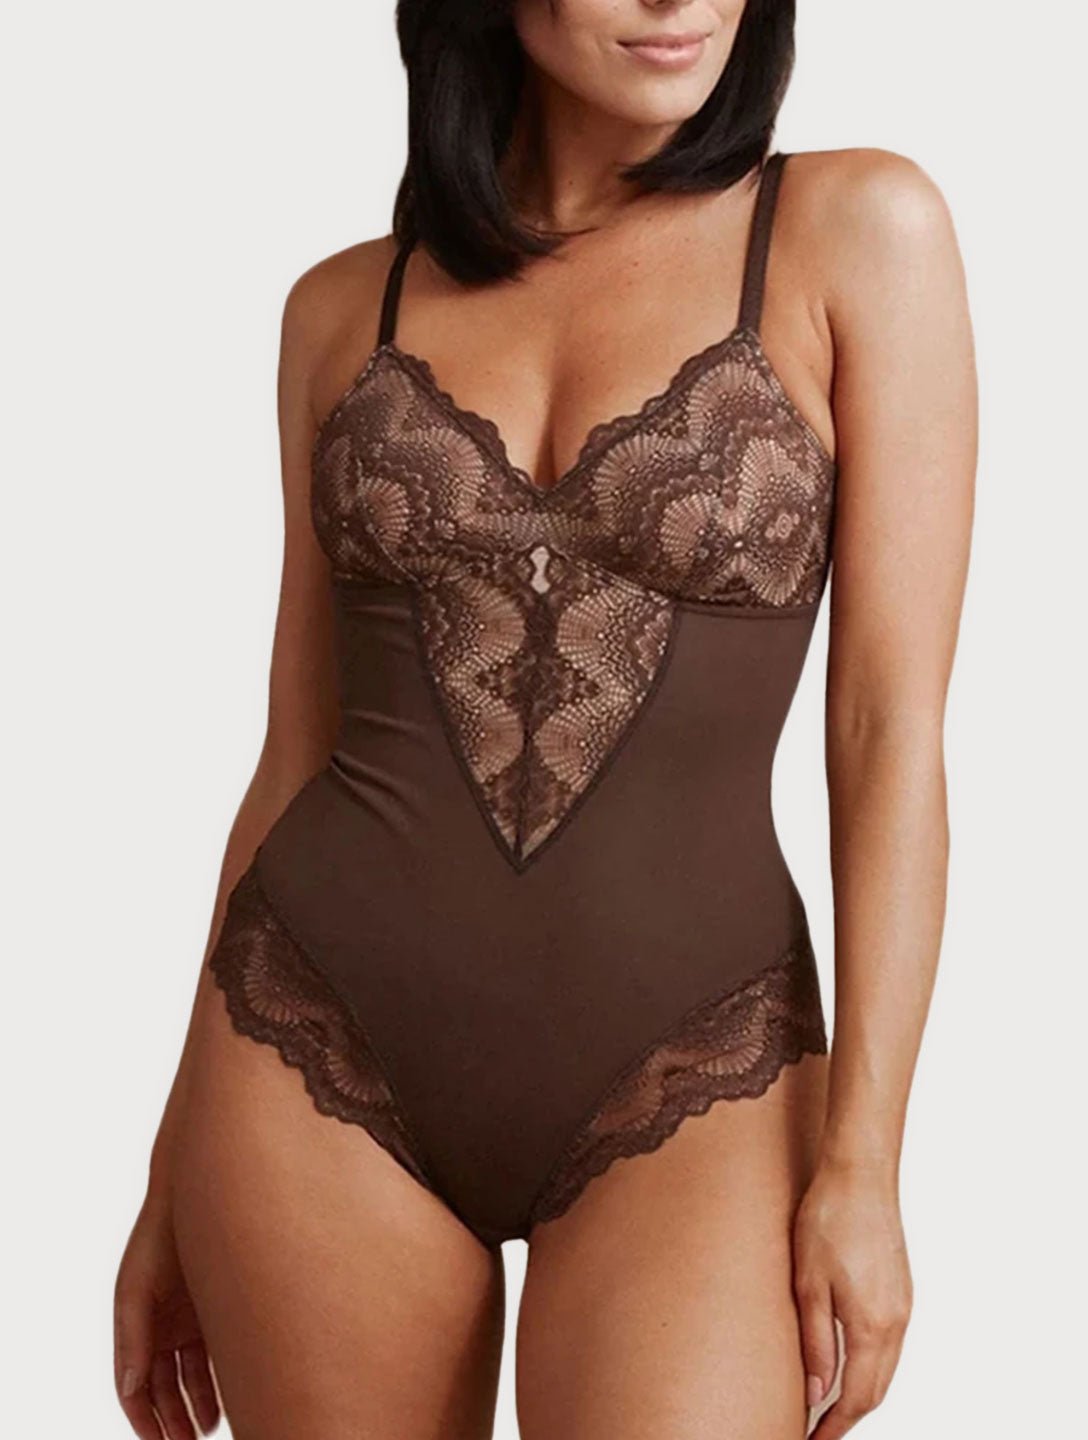 Styling our Snatched Shapewear bodysuit in black #shapely